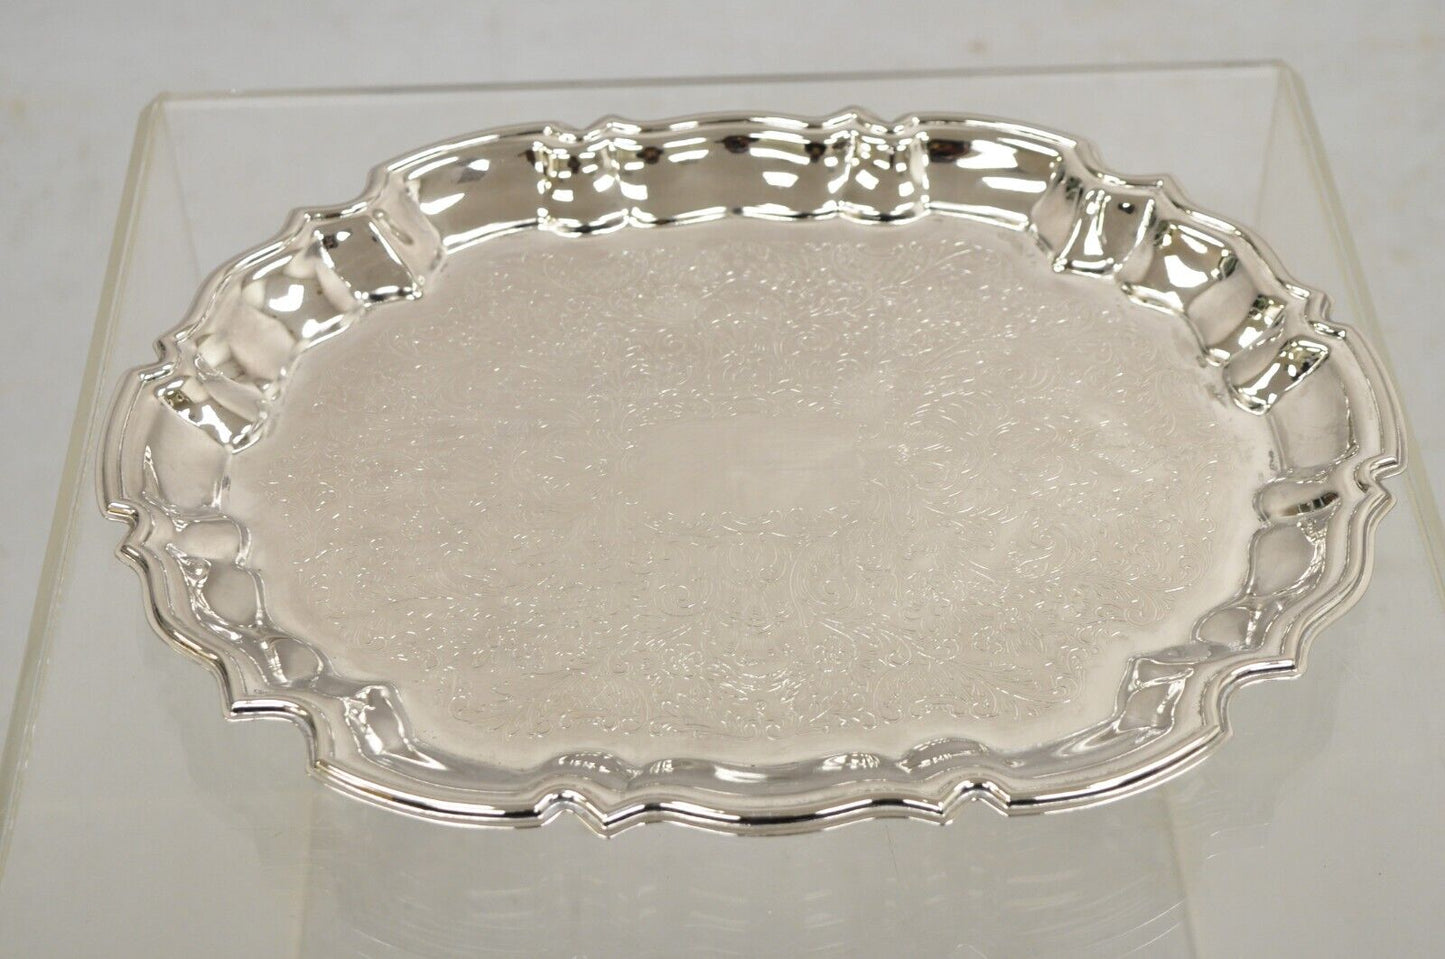 Vintage Victorian Style Oval Scalloped Silver Plated Serving Platter Tray